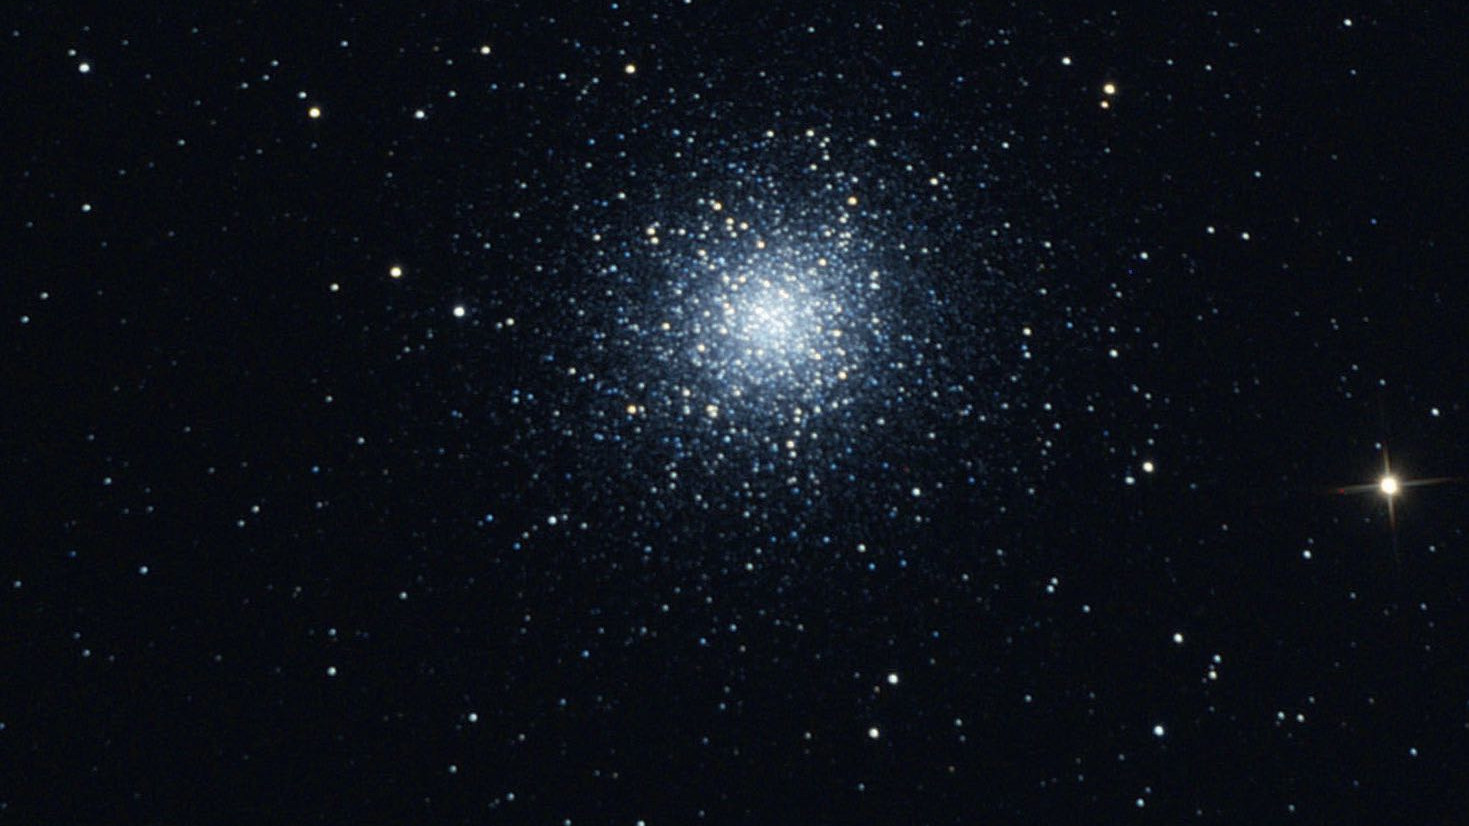 You cannot resolve M13 with binoculars, but you can still identify it as a globular cluster. Marcus Degenkolbe